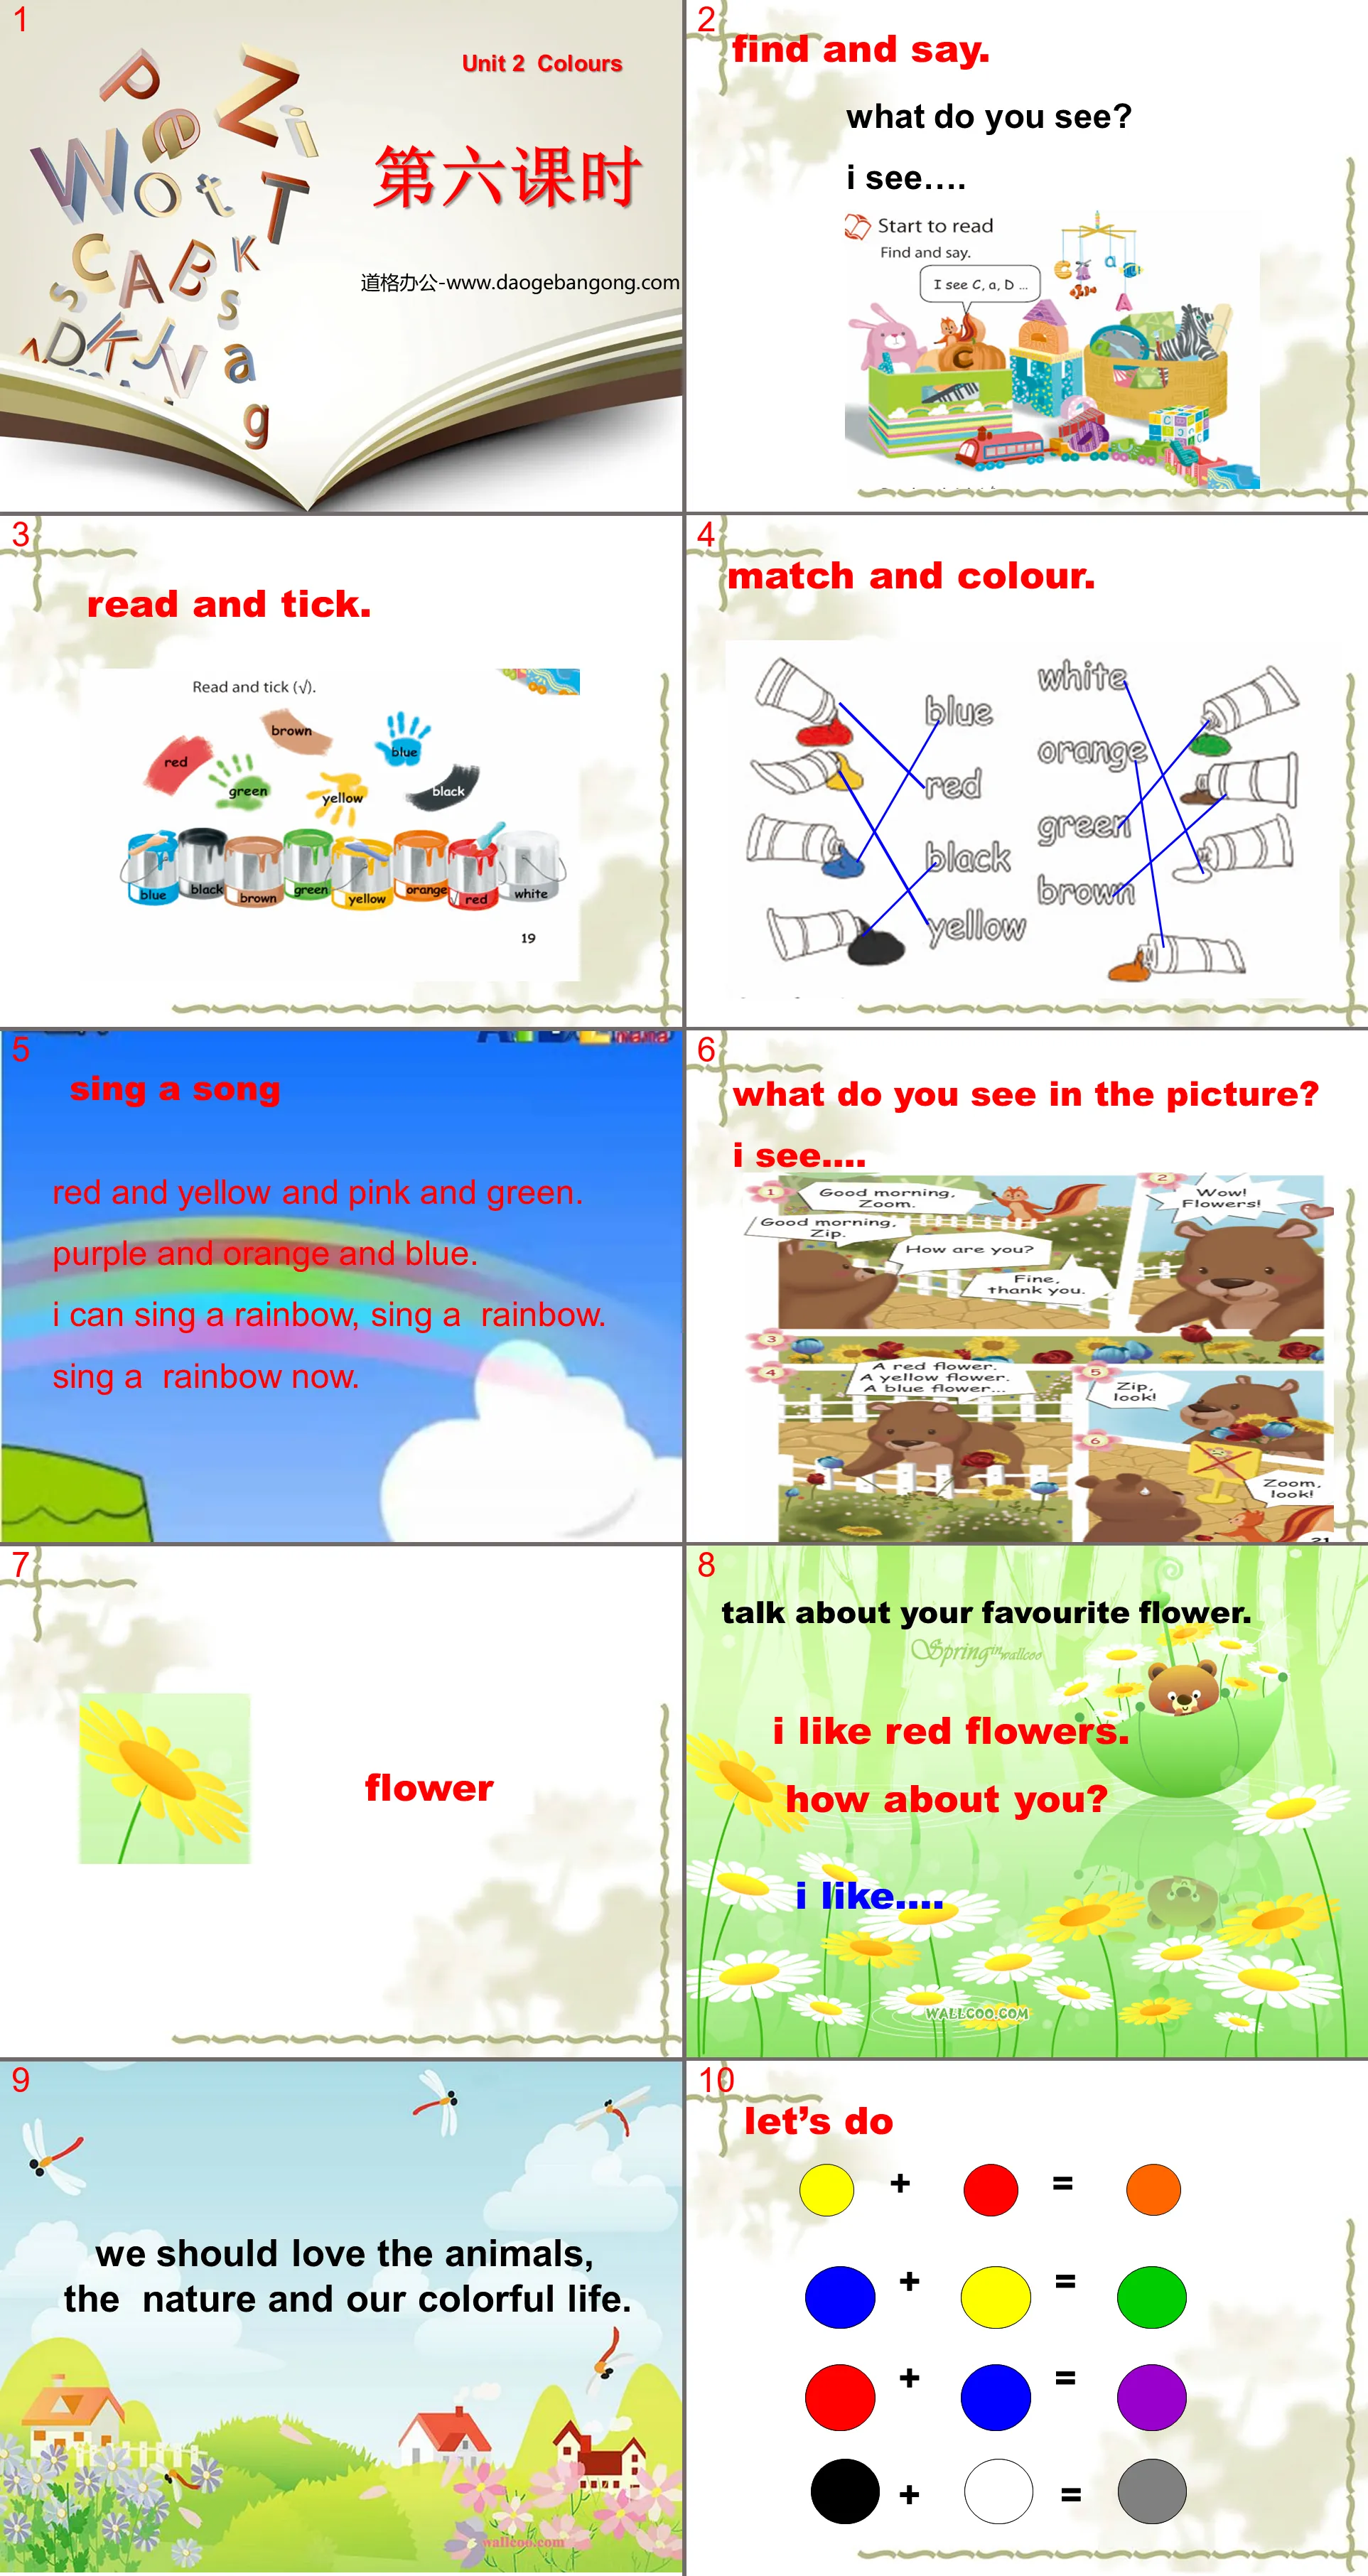 "Unit2 Colors" PPT courseware for the sixth lesson